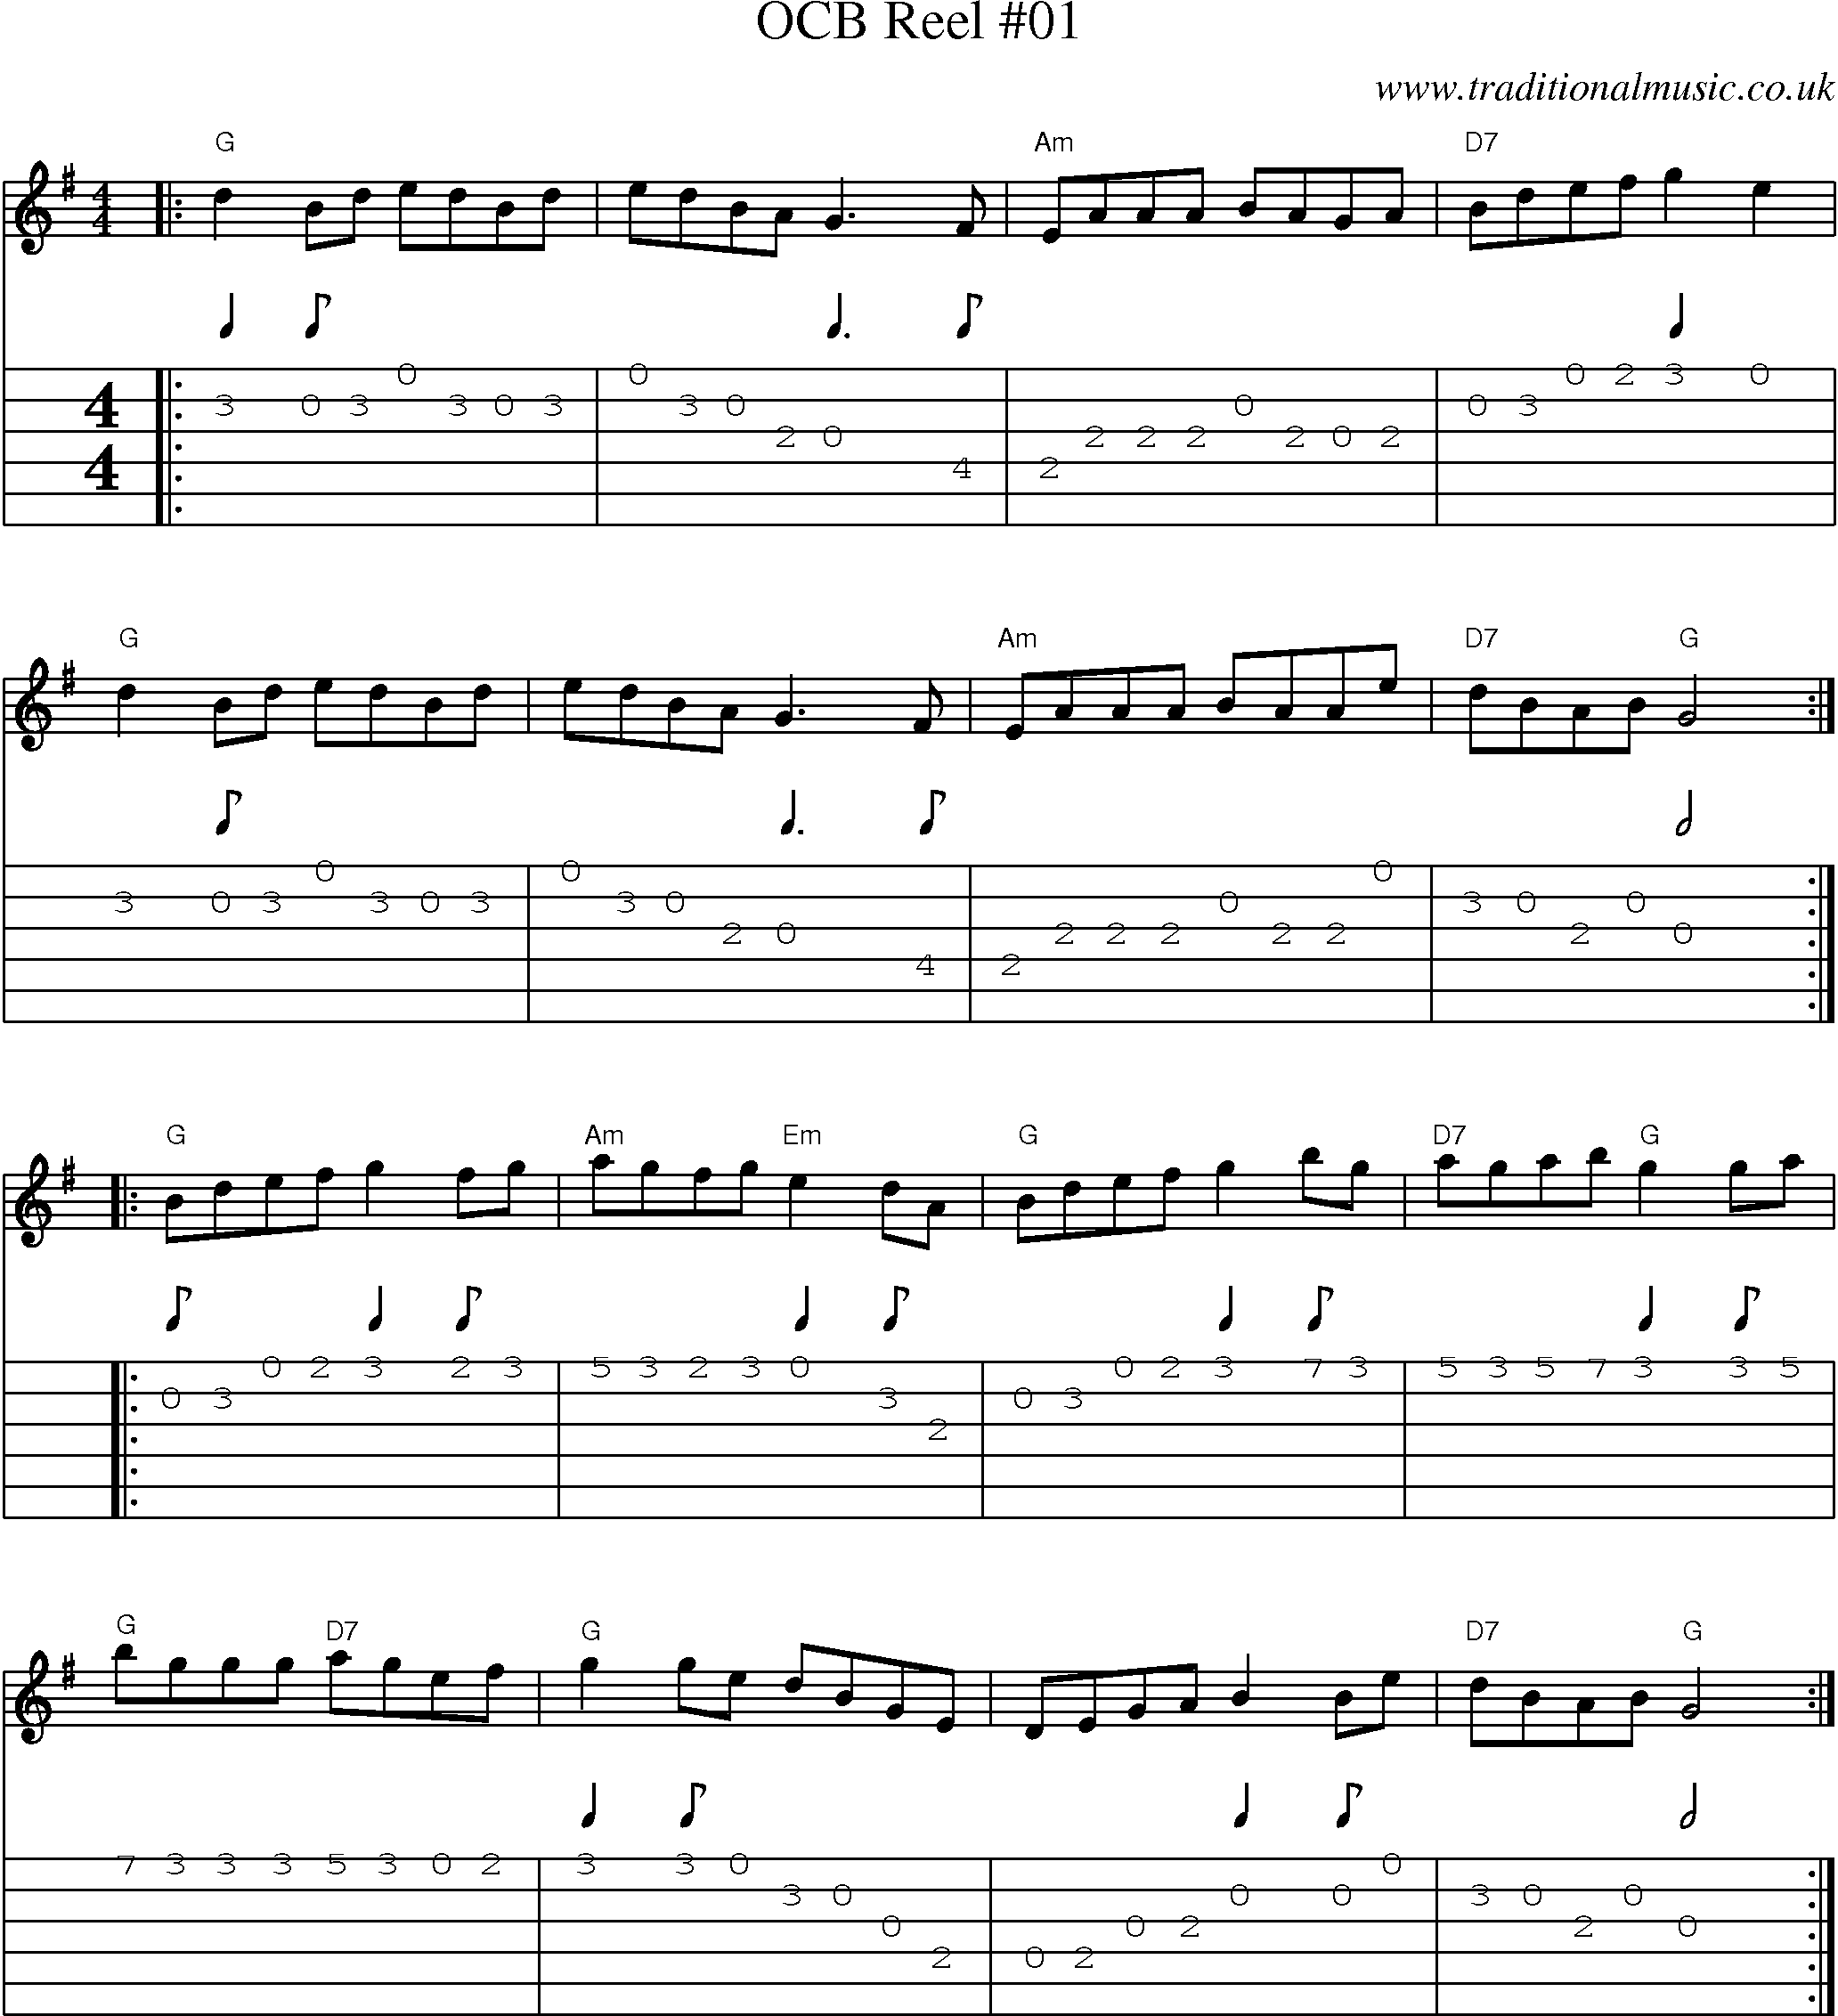 Music Score and Guitar Tabs for Ocb Reel 01